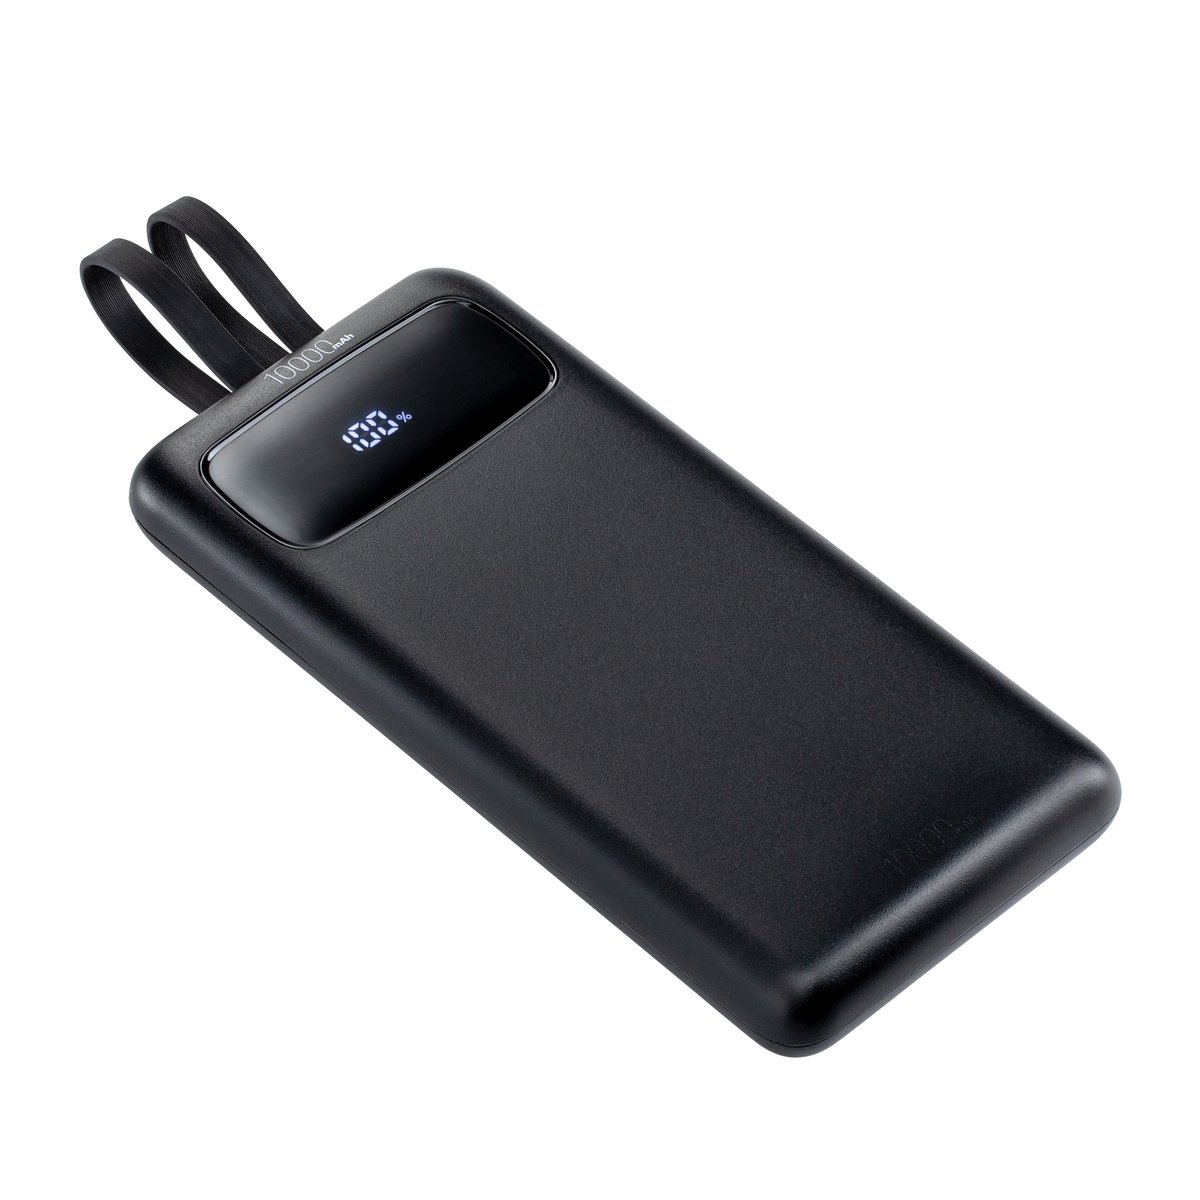 Powerbank mit Fast Charge und Power Delivery REEVES-PULSEXPRESS 10 schwarz 10000 mAh